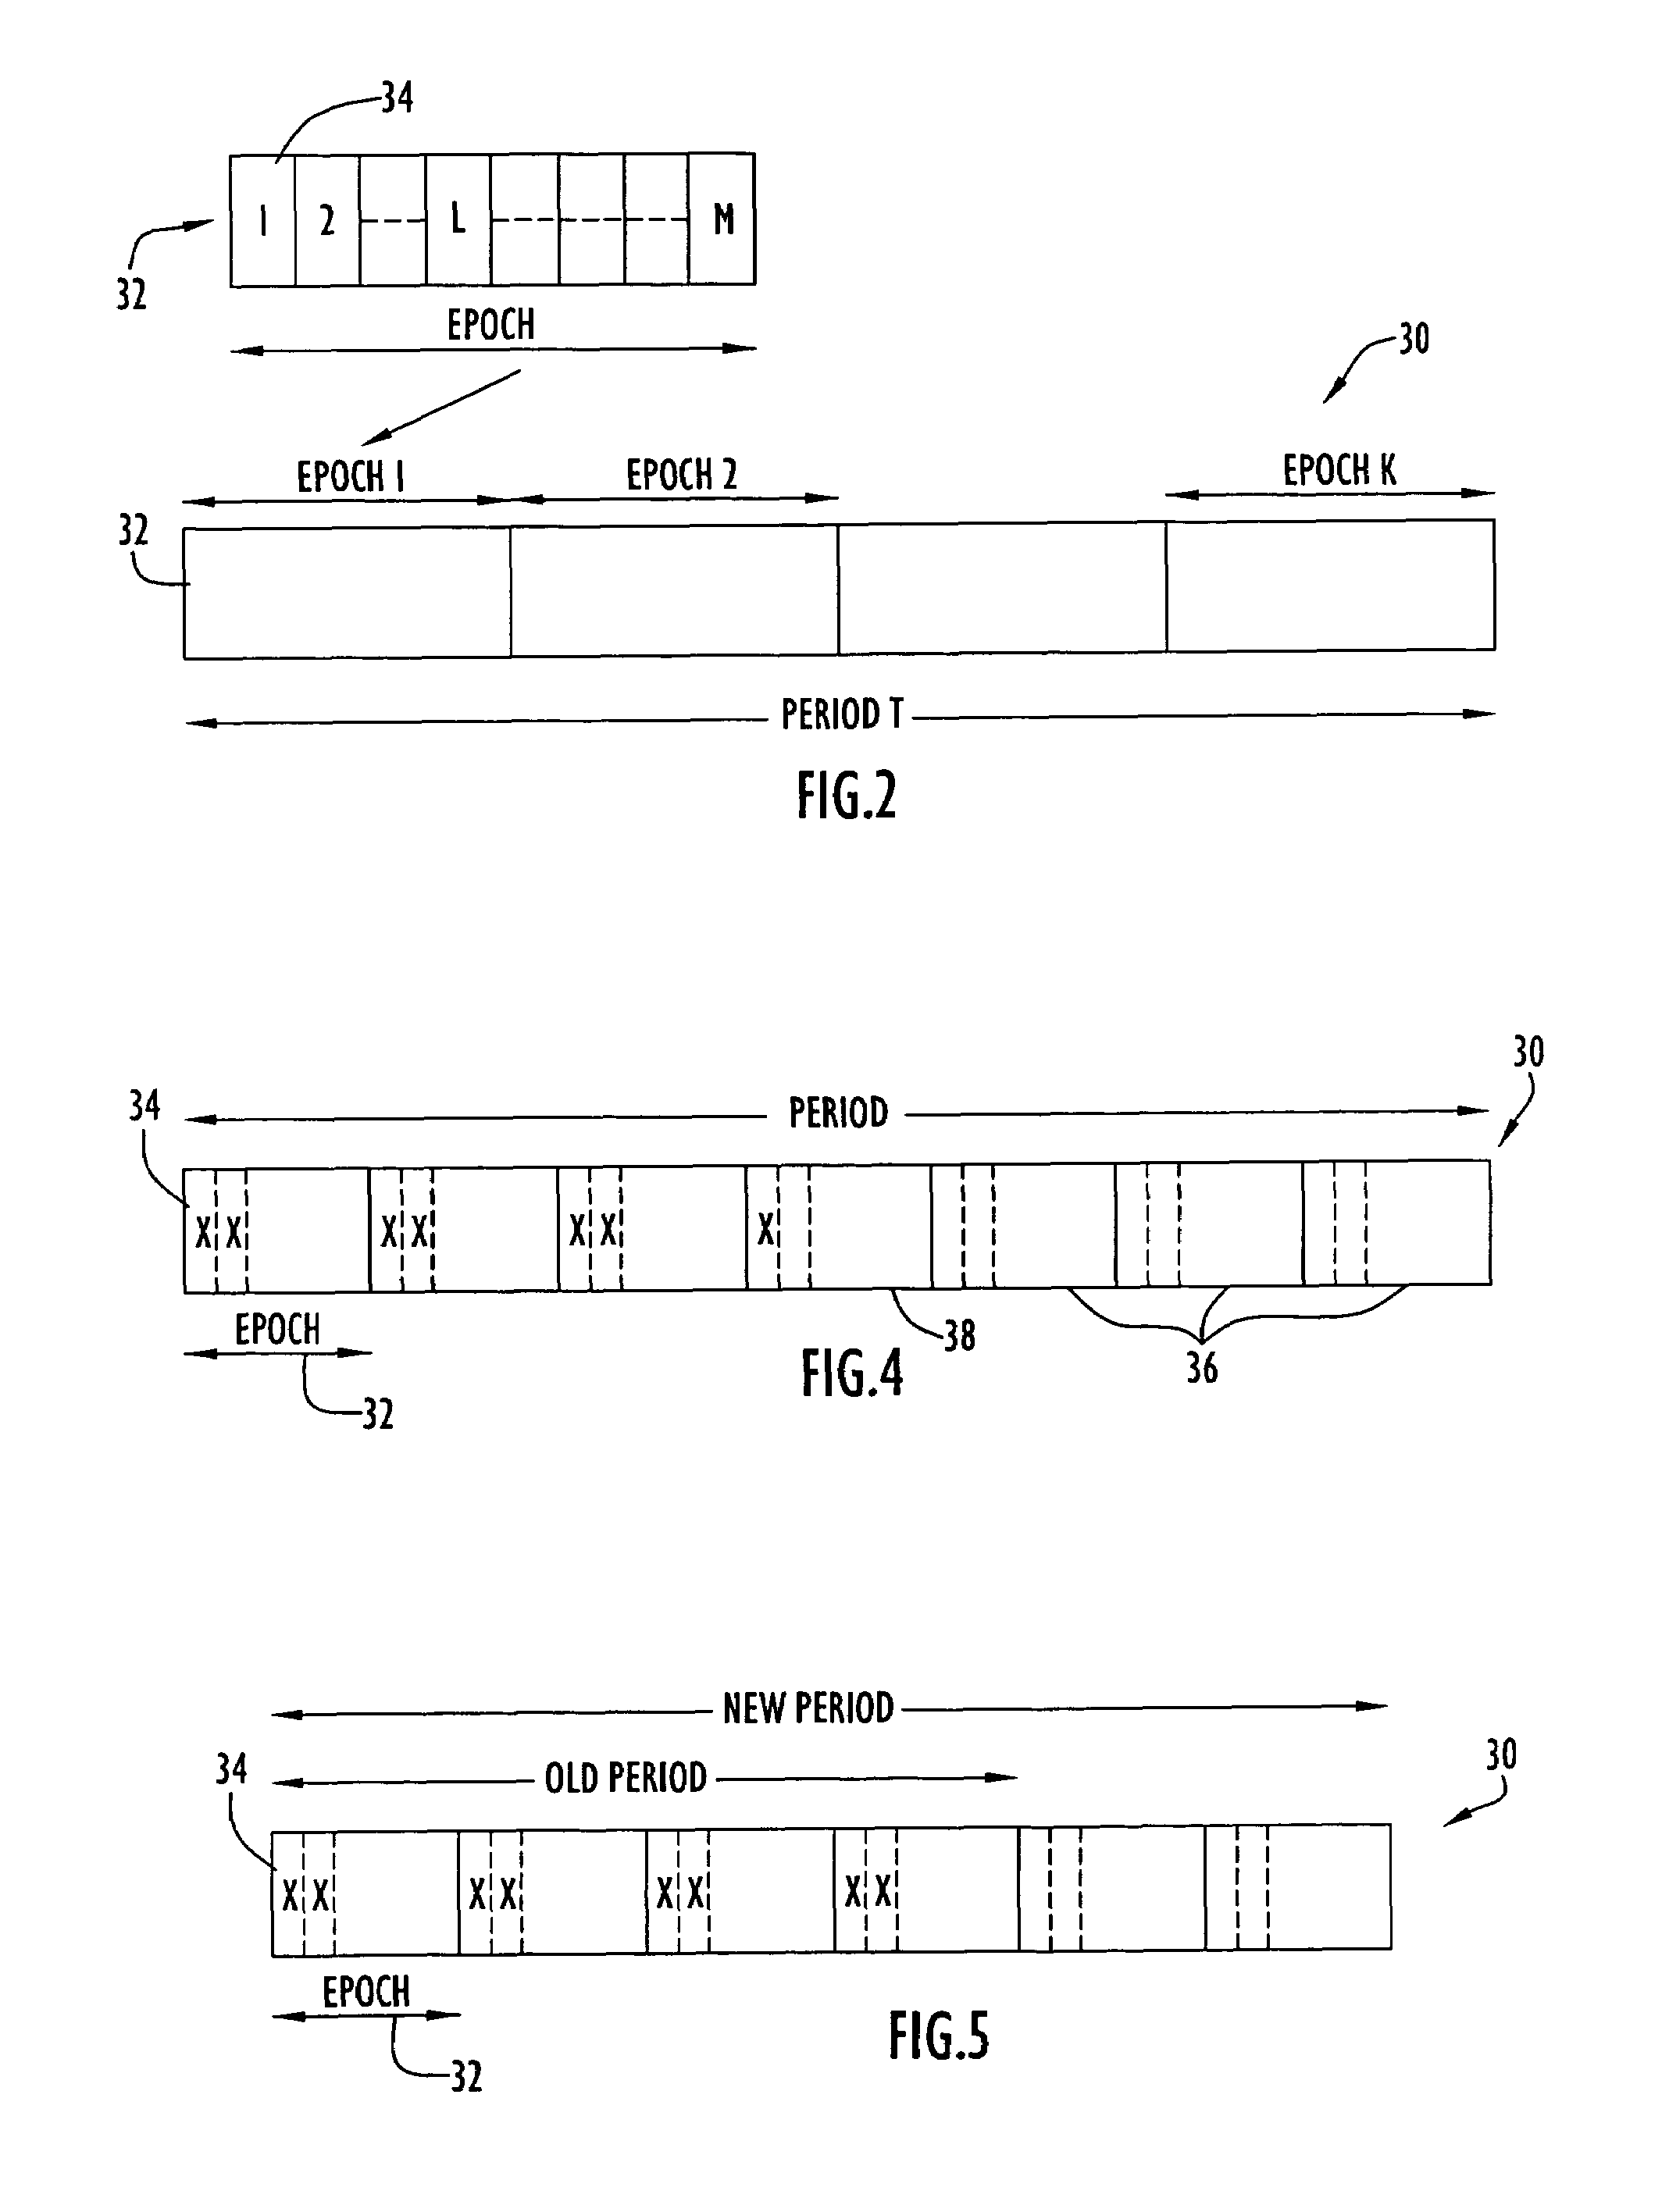 Method and apparatus for dynamic neighbor discovery within wireless networks using time division multiple access (TDMA)